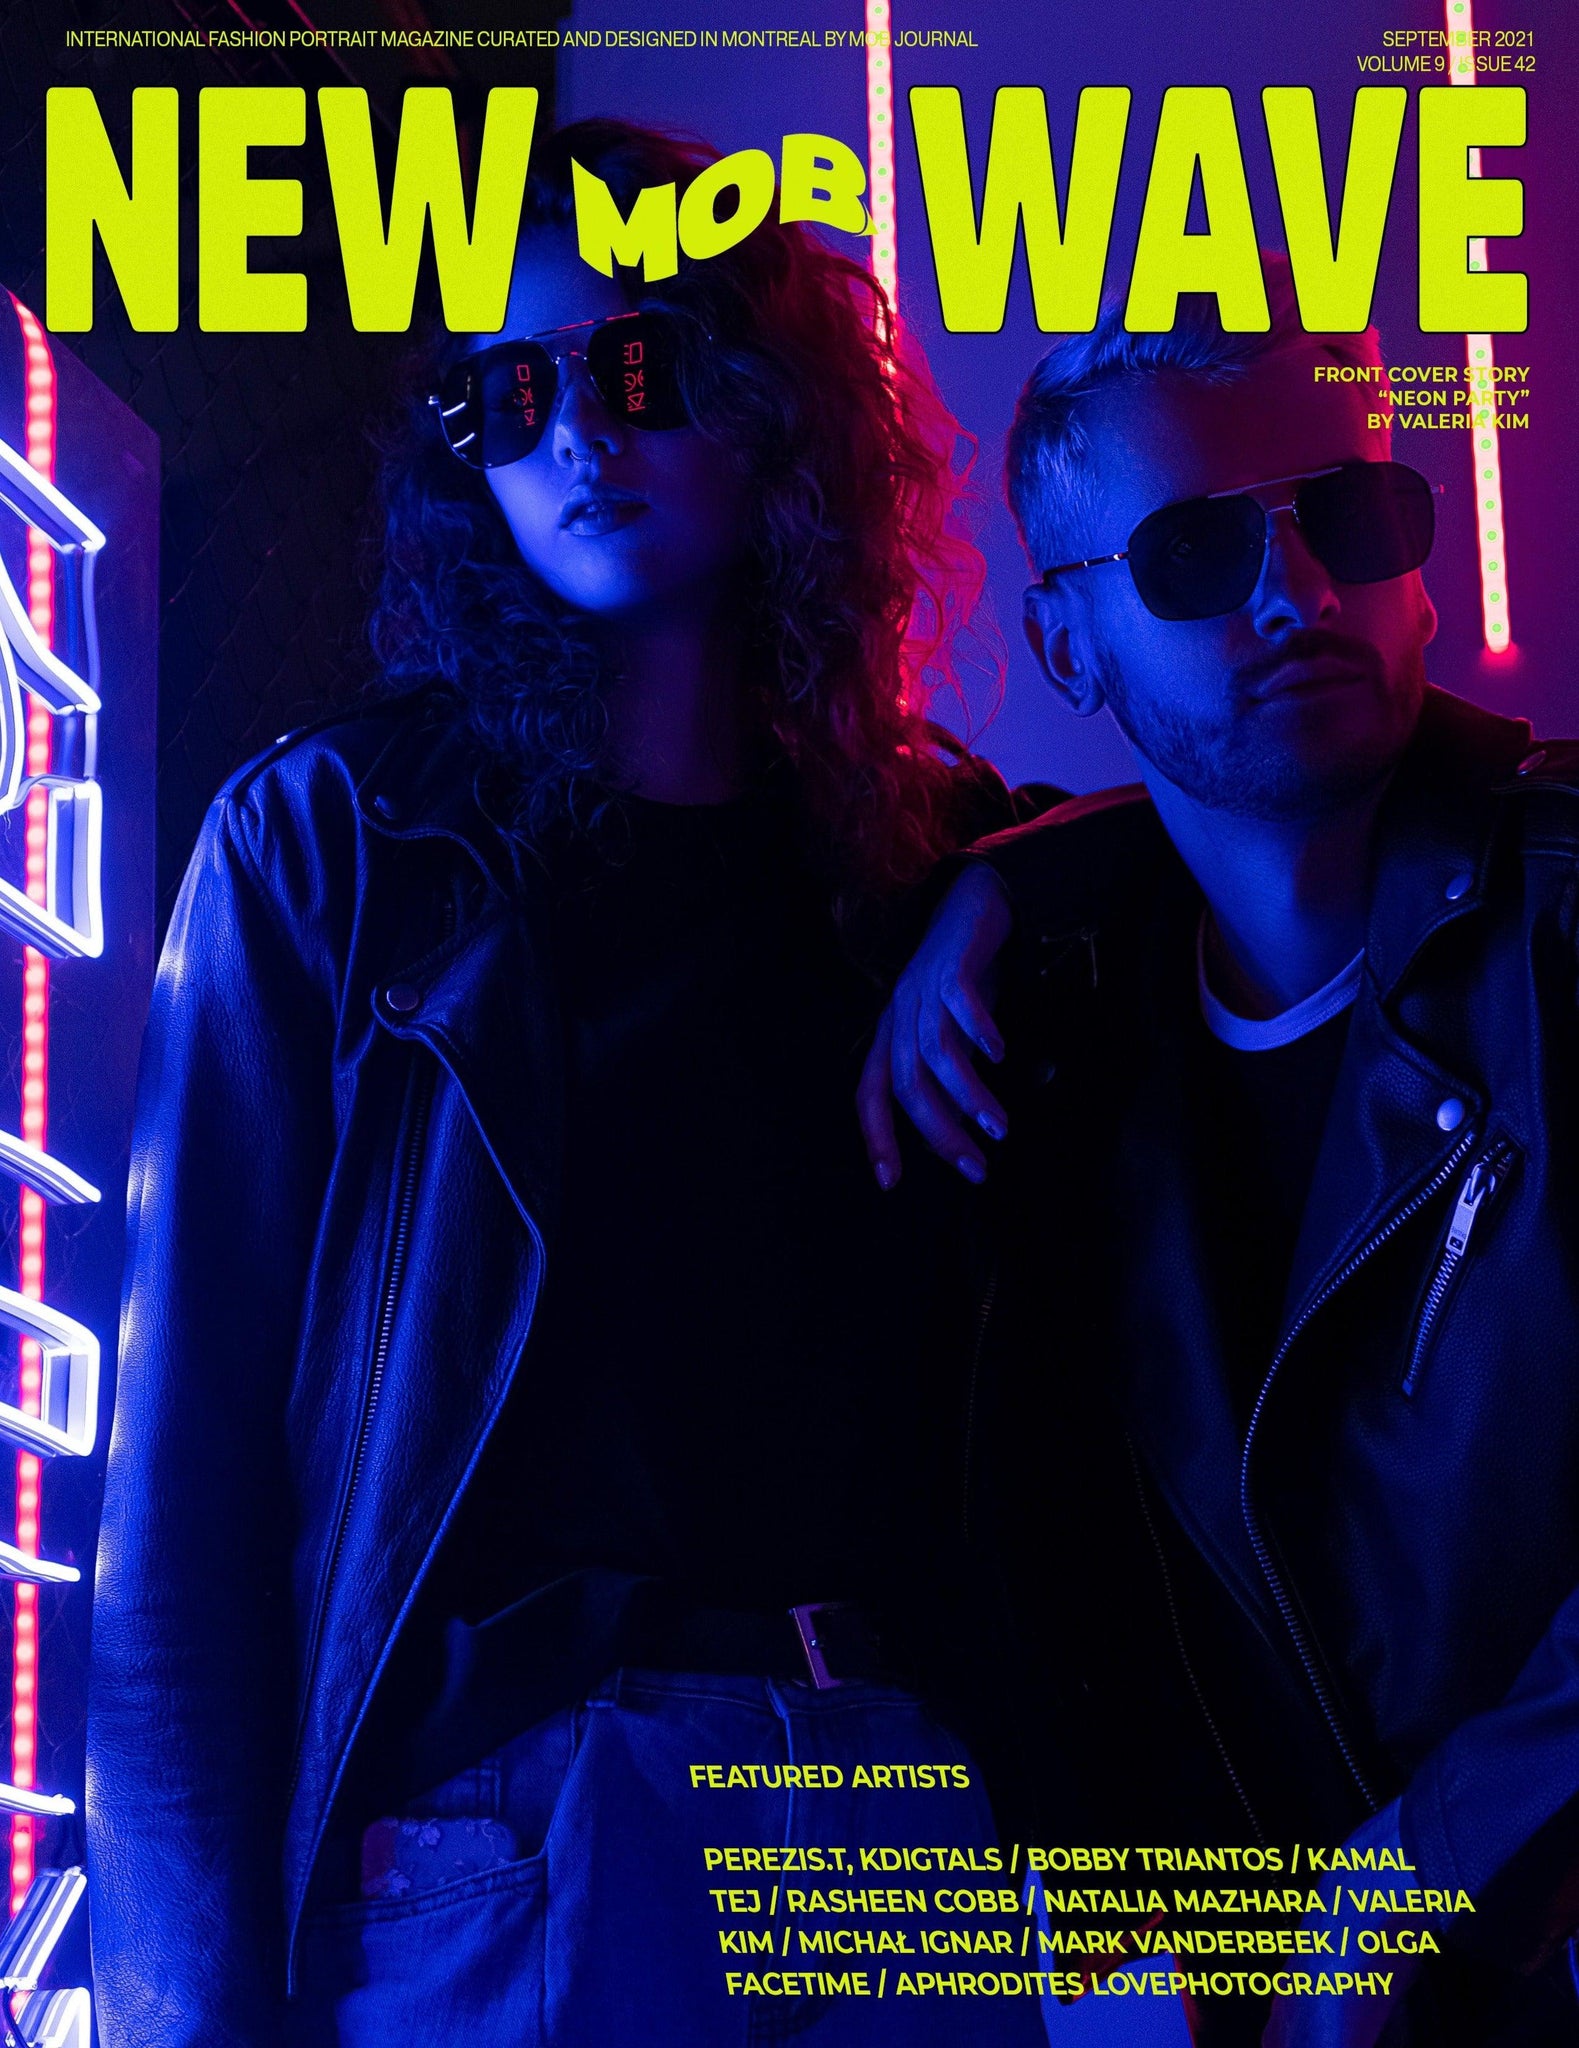 NEW WAVE | VOLUME NINE | ISSUE #42 - Mob Journal